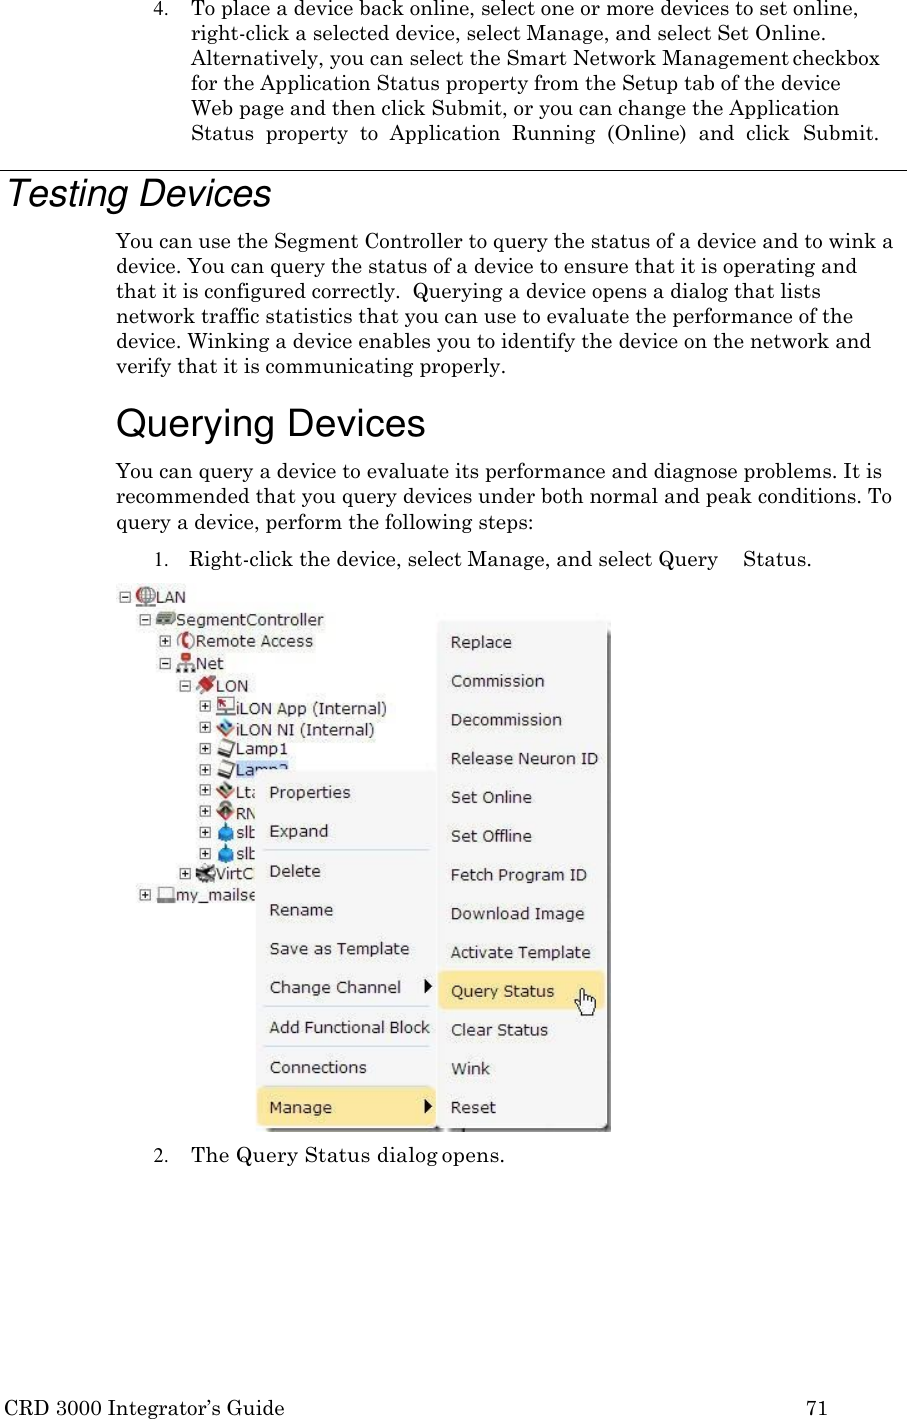 CRD 3000 Integrator’s Guide 71  4. To place a device back online, select one or more devices to set online, right-click a selected device, select Manage, and select Set Online. Alternatively, you can select the Smart Network Management checkbox for the Application Status property from the Setup tab of the device Web page and then click Submit, or you can change the Application Status  property  to  Application  Running  (Online)  and  click  Submit.  Testing Devices You can use the Segment Controller to query the status of a device and to wink a device. You can query the status of a device to ensure that it is operating and that it is configured correctly.  Querying a device opens a dialog that lists network traffic statistics that you can use to evaluate the performance of the device. Winking a device enables you to identify the device on the network and verify that it is communicating properly.  Querying Devices You can query a device to evaluate its performance and diagnose problems. It is recommended that you query devices under both normal and peak conditions. To query a device, perform the following steps: 1. Right-click the device, select Manage, and select Query    Status. 2. The Query Status dialog opens. 